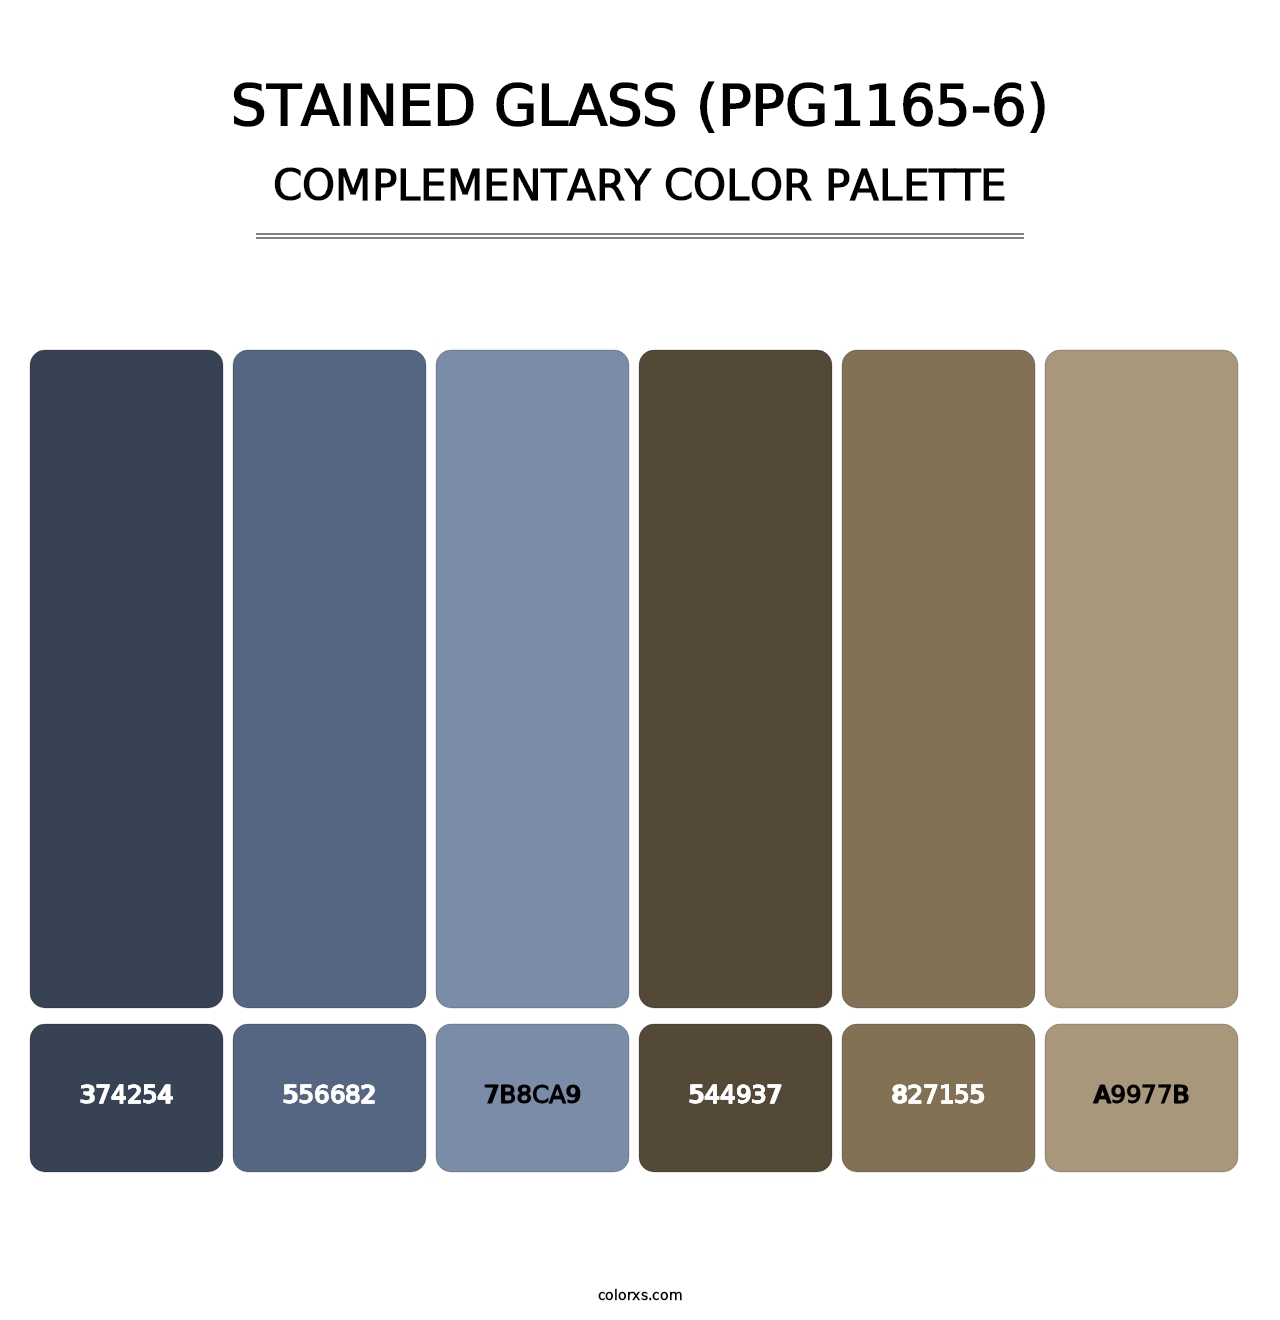 Stained Glass (PPG1165-6) - Complementary Color Palette